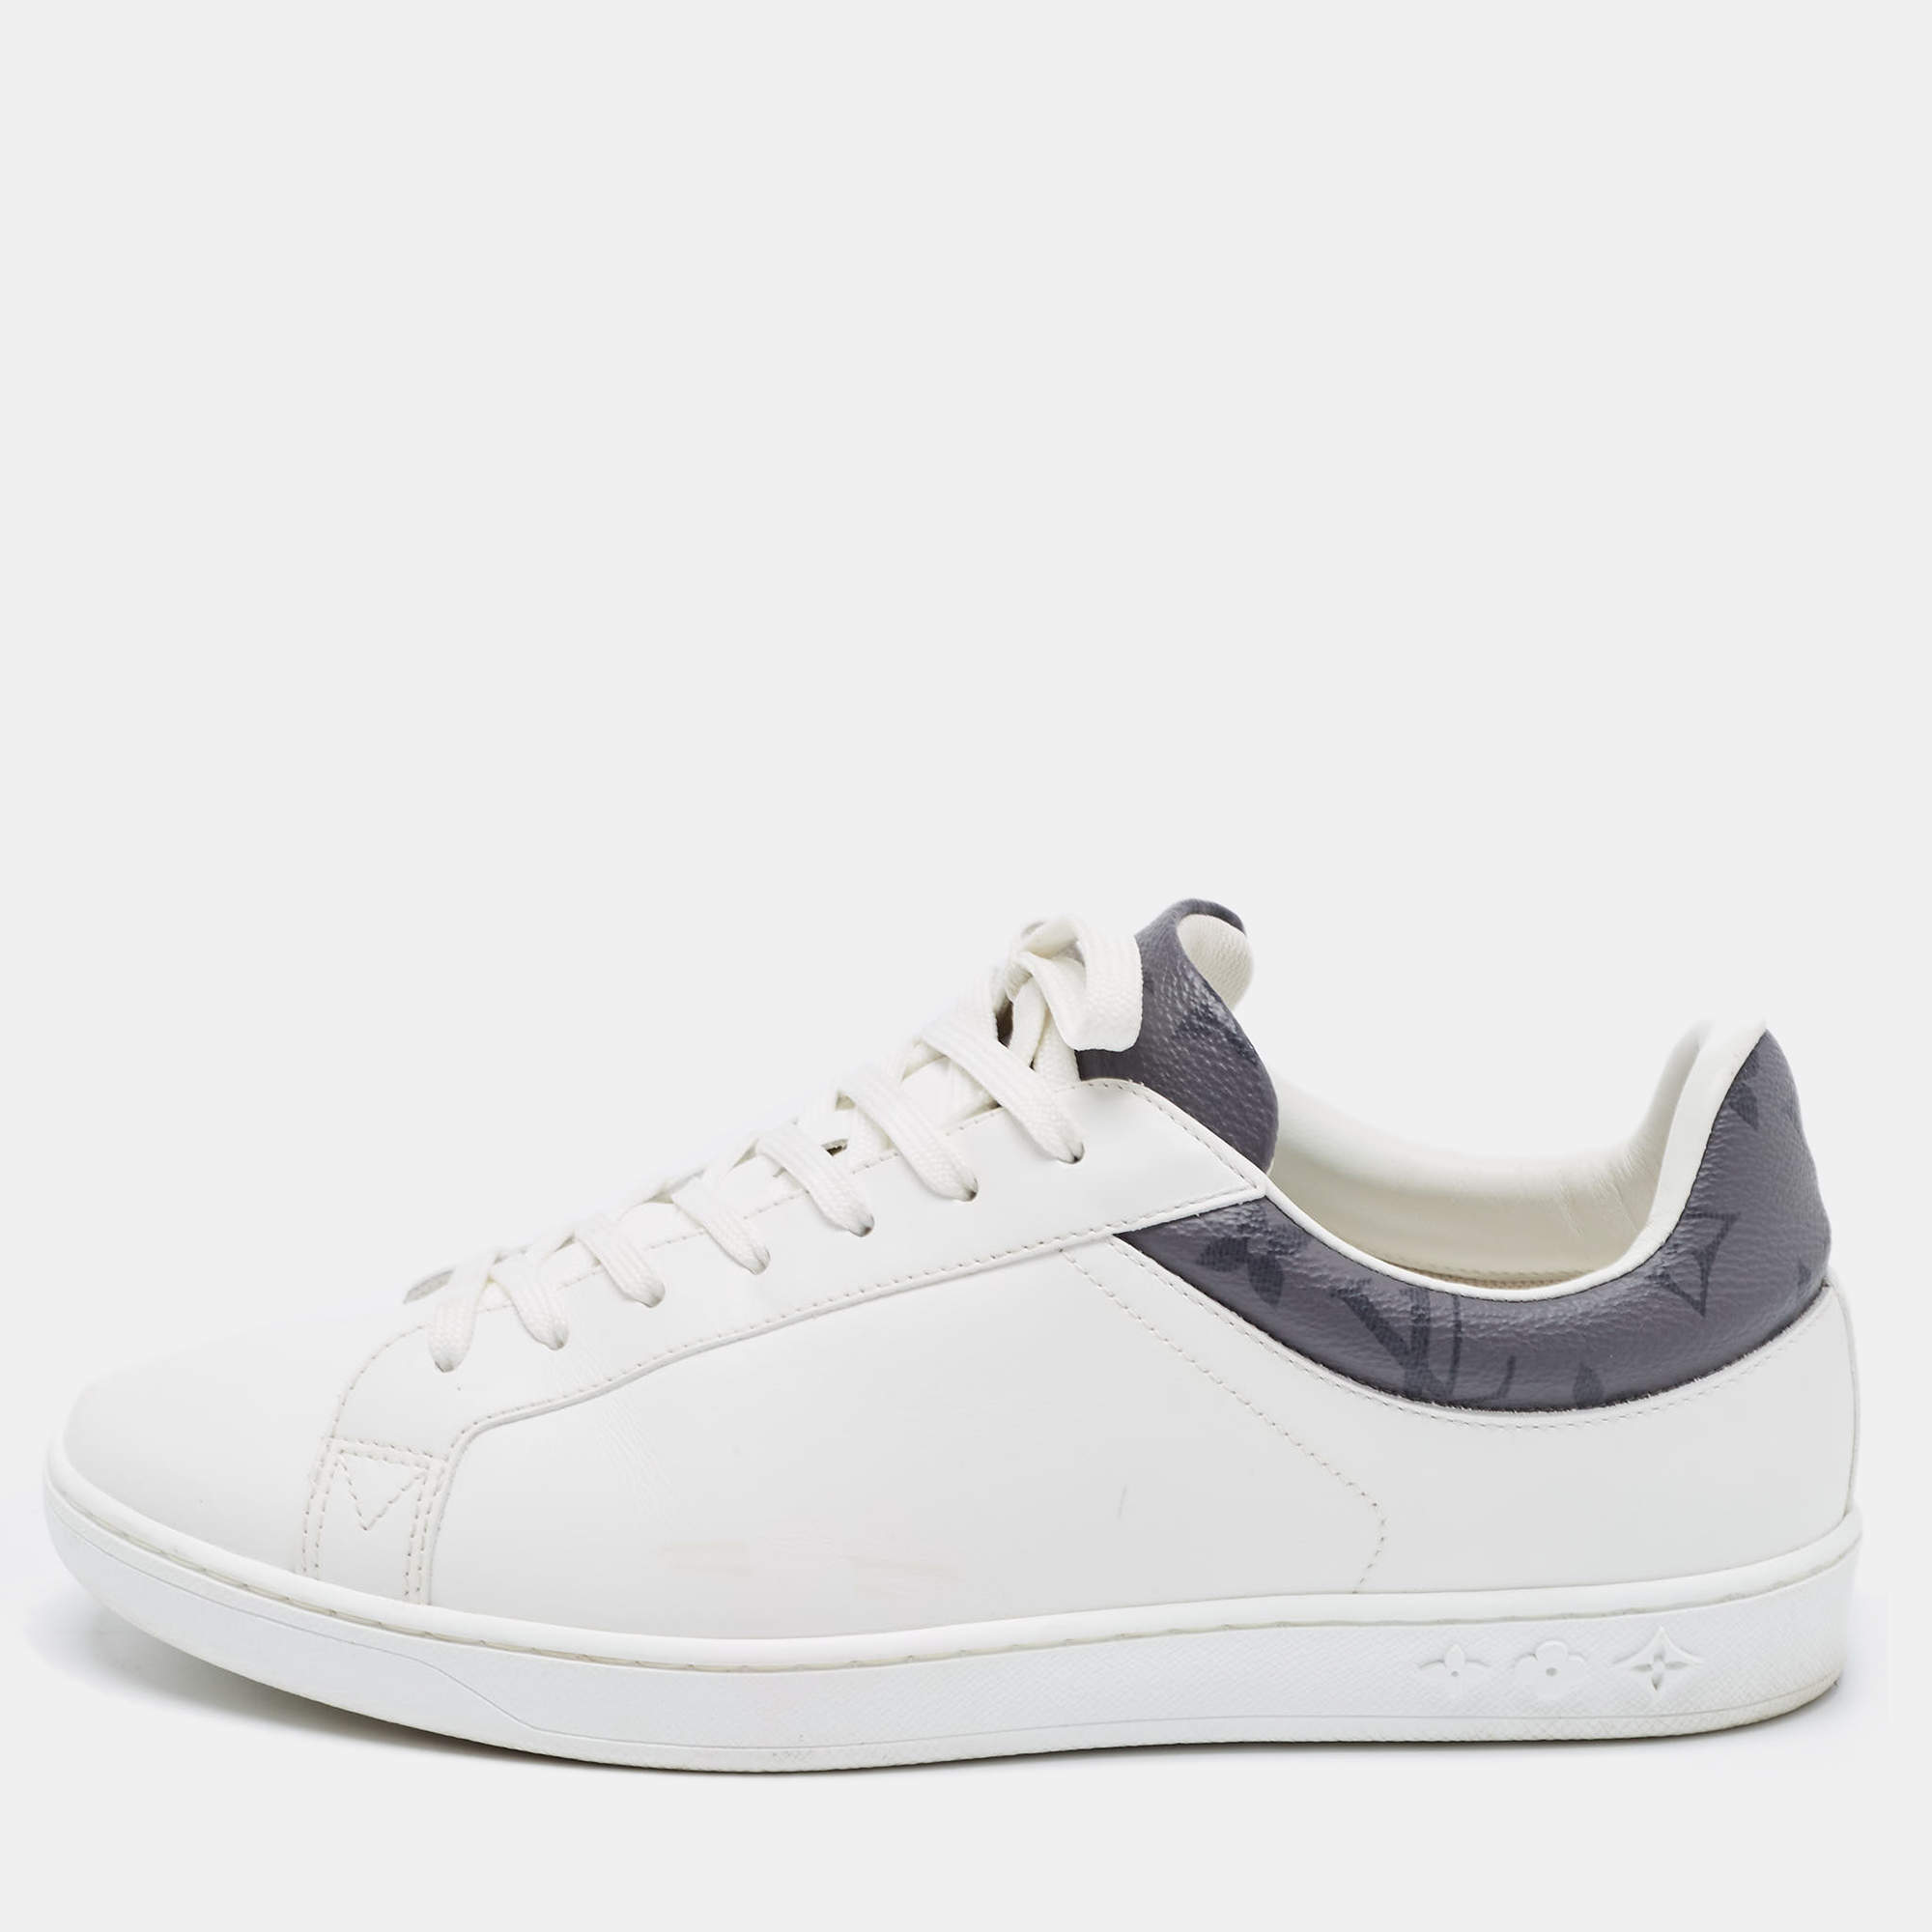 Louis Vuitton White Leather Luxembourg Sneakers Size 41 Louis Vuitton ...